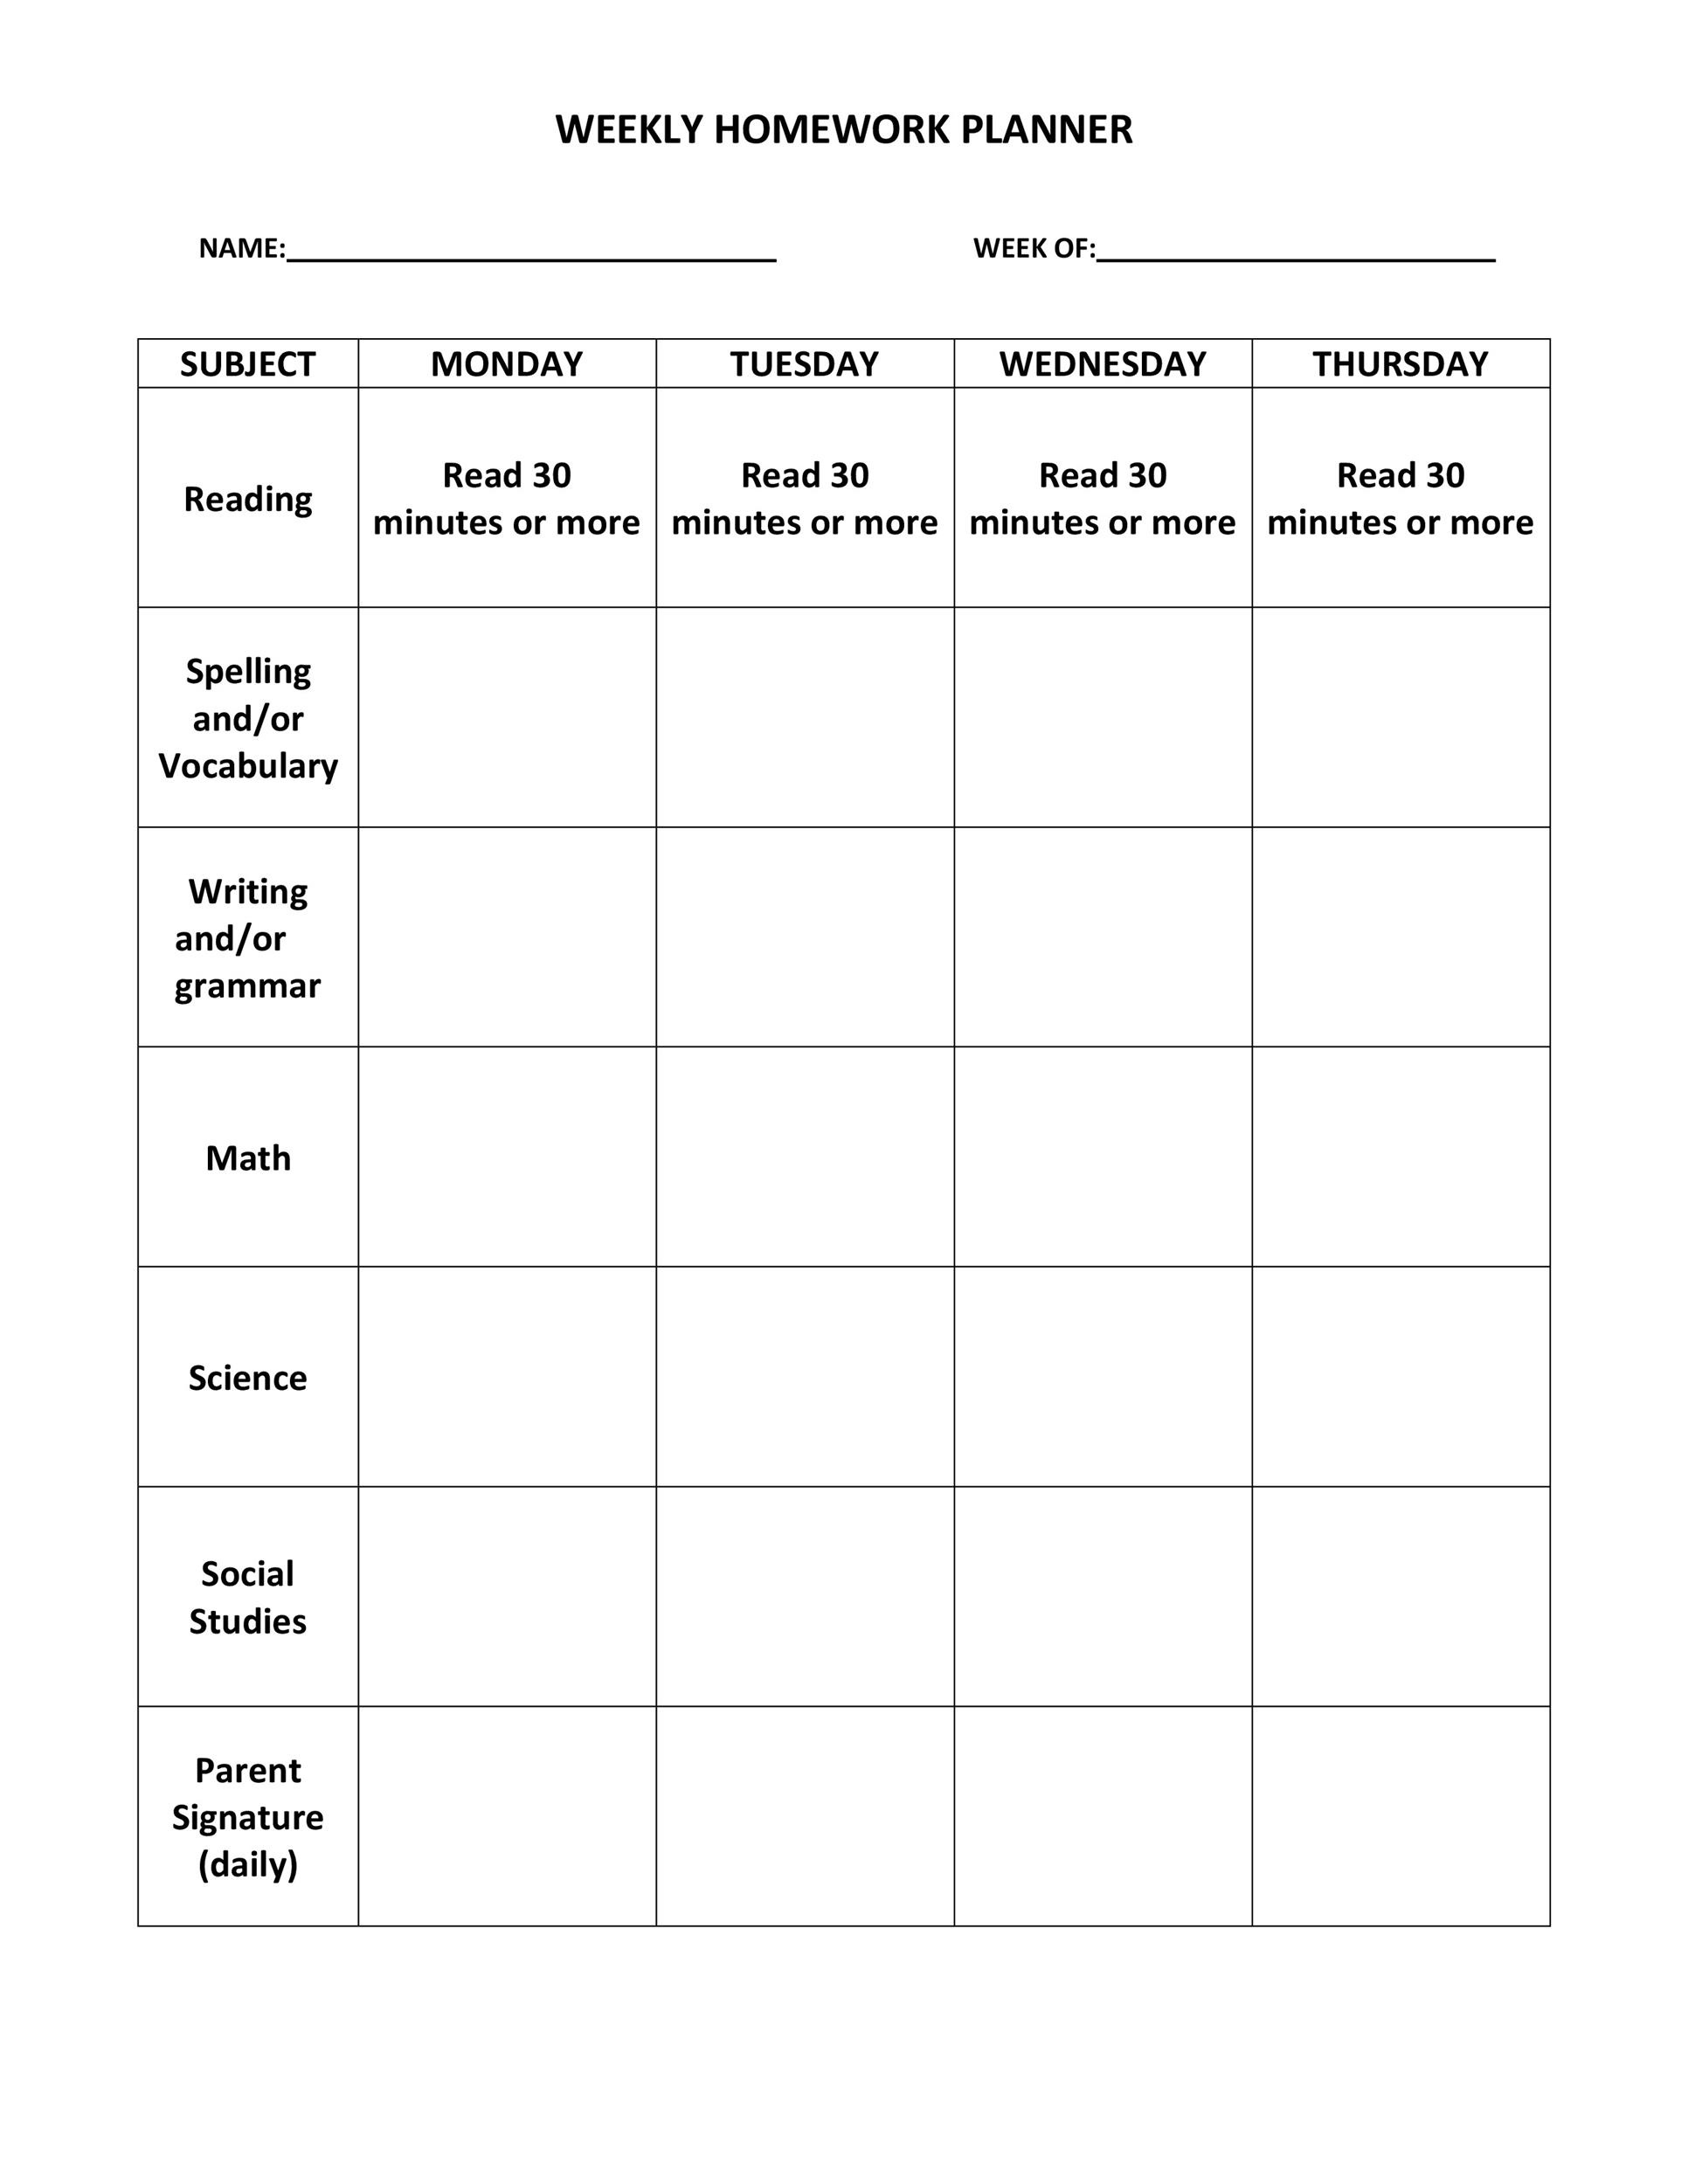 37 Printable Homework Planners Only The Best ᐅ Templatelab Within Homework Agenda Template